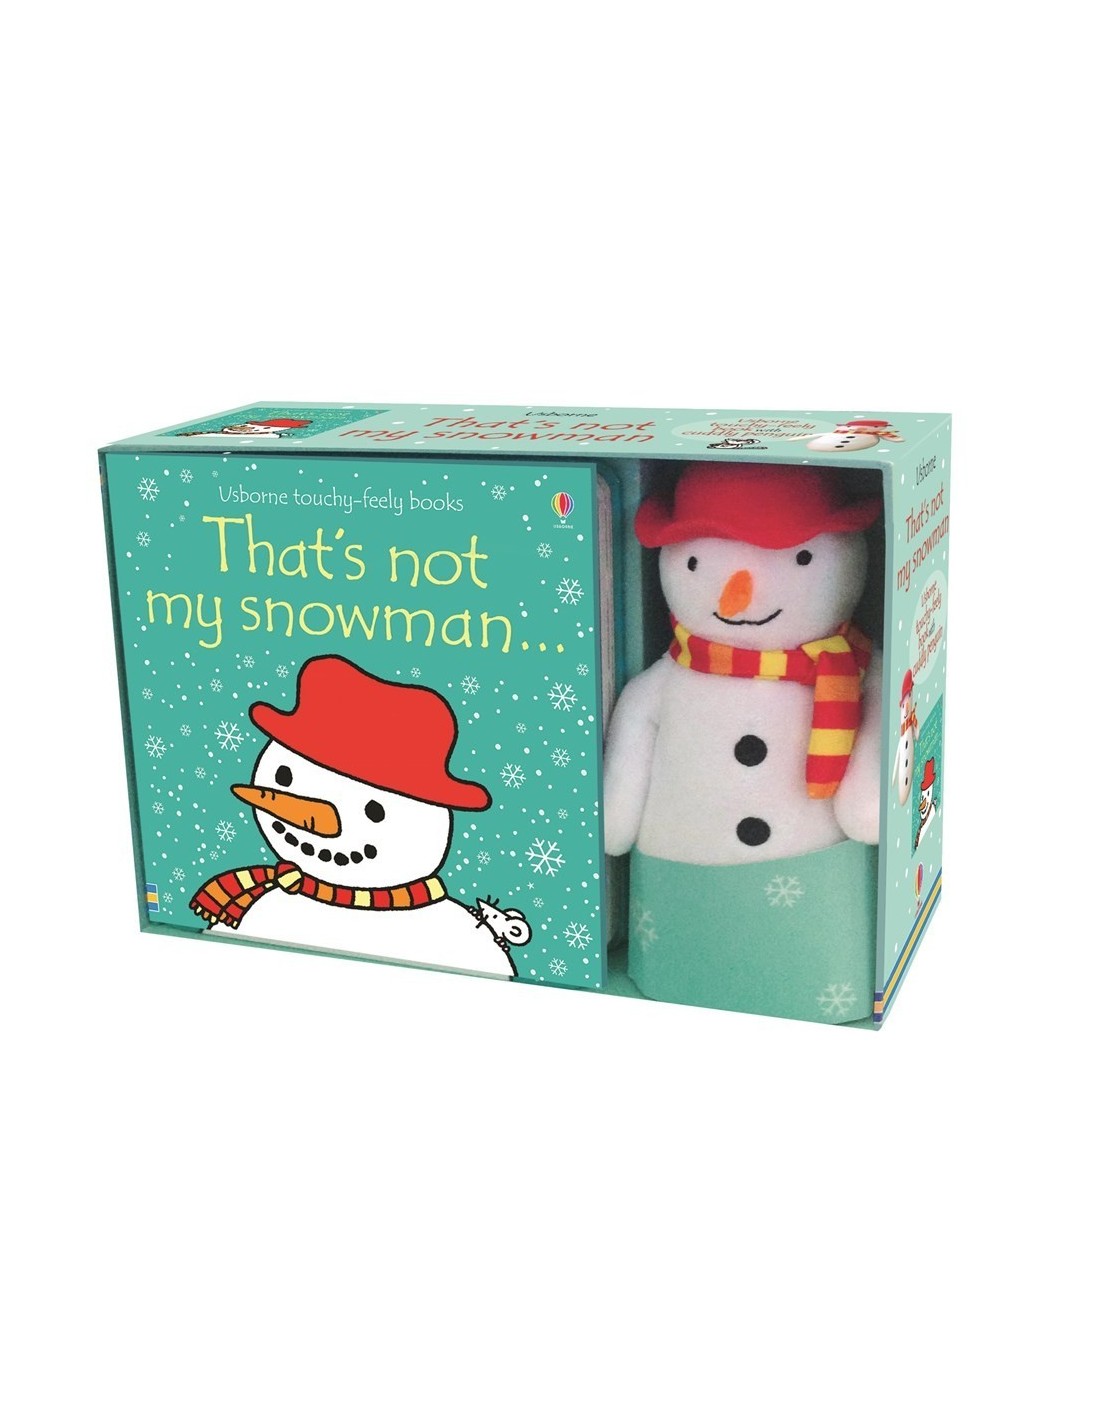 That's not my snowman... book and toy